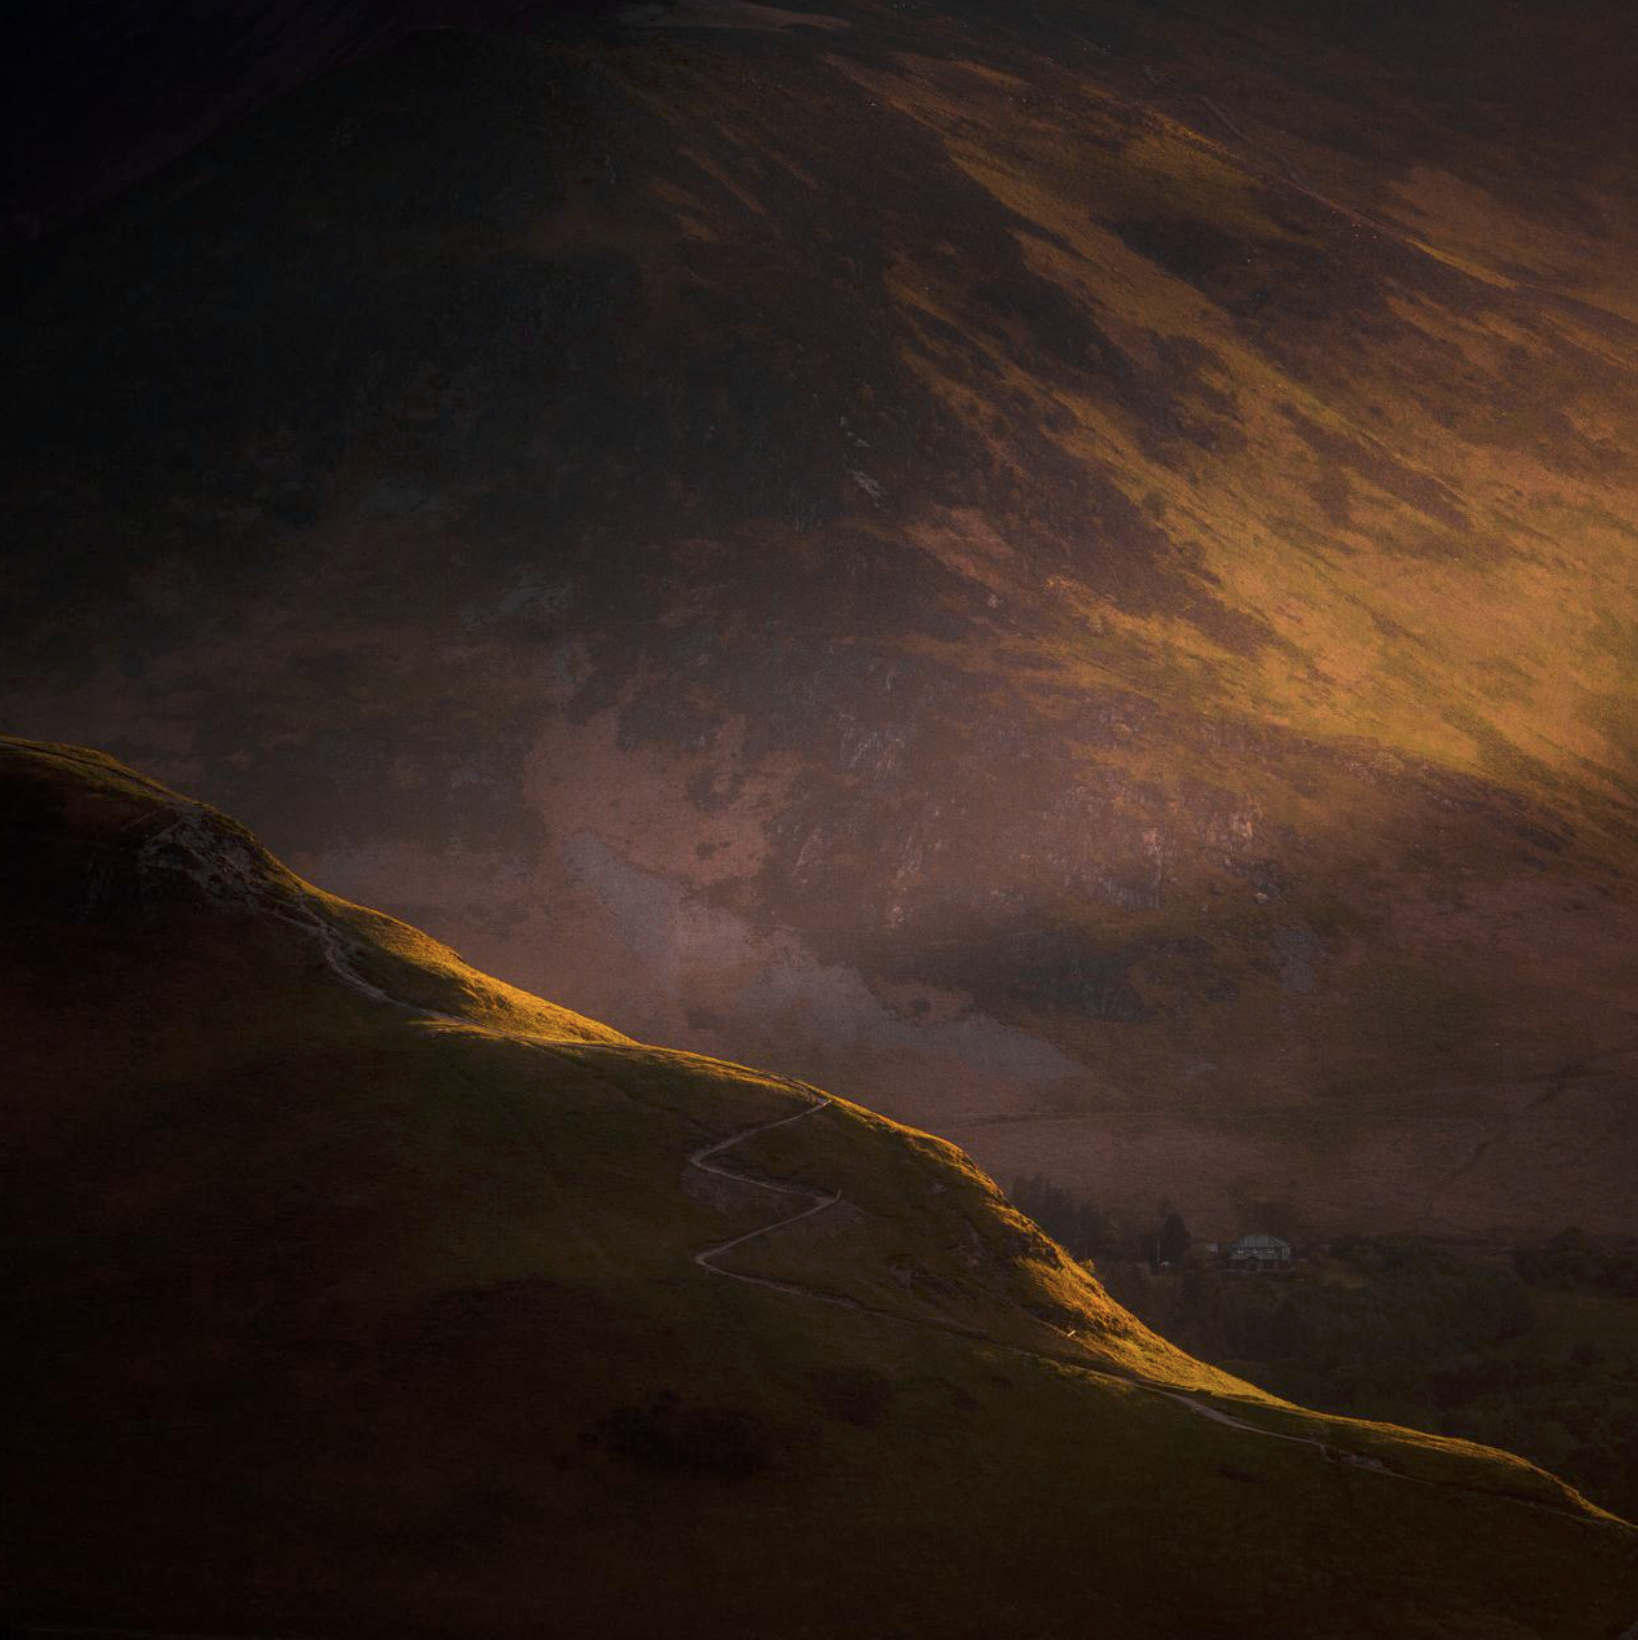 Last Light on Catbells: The image was all about the day’s last light dancing on the fells. 